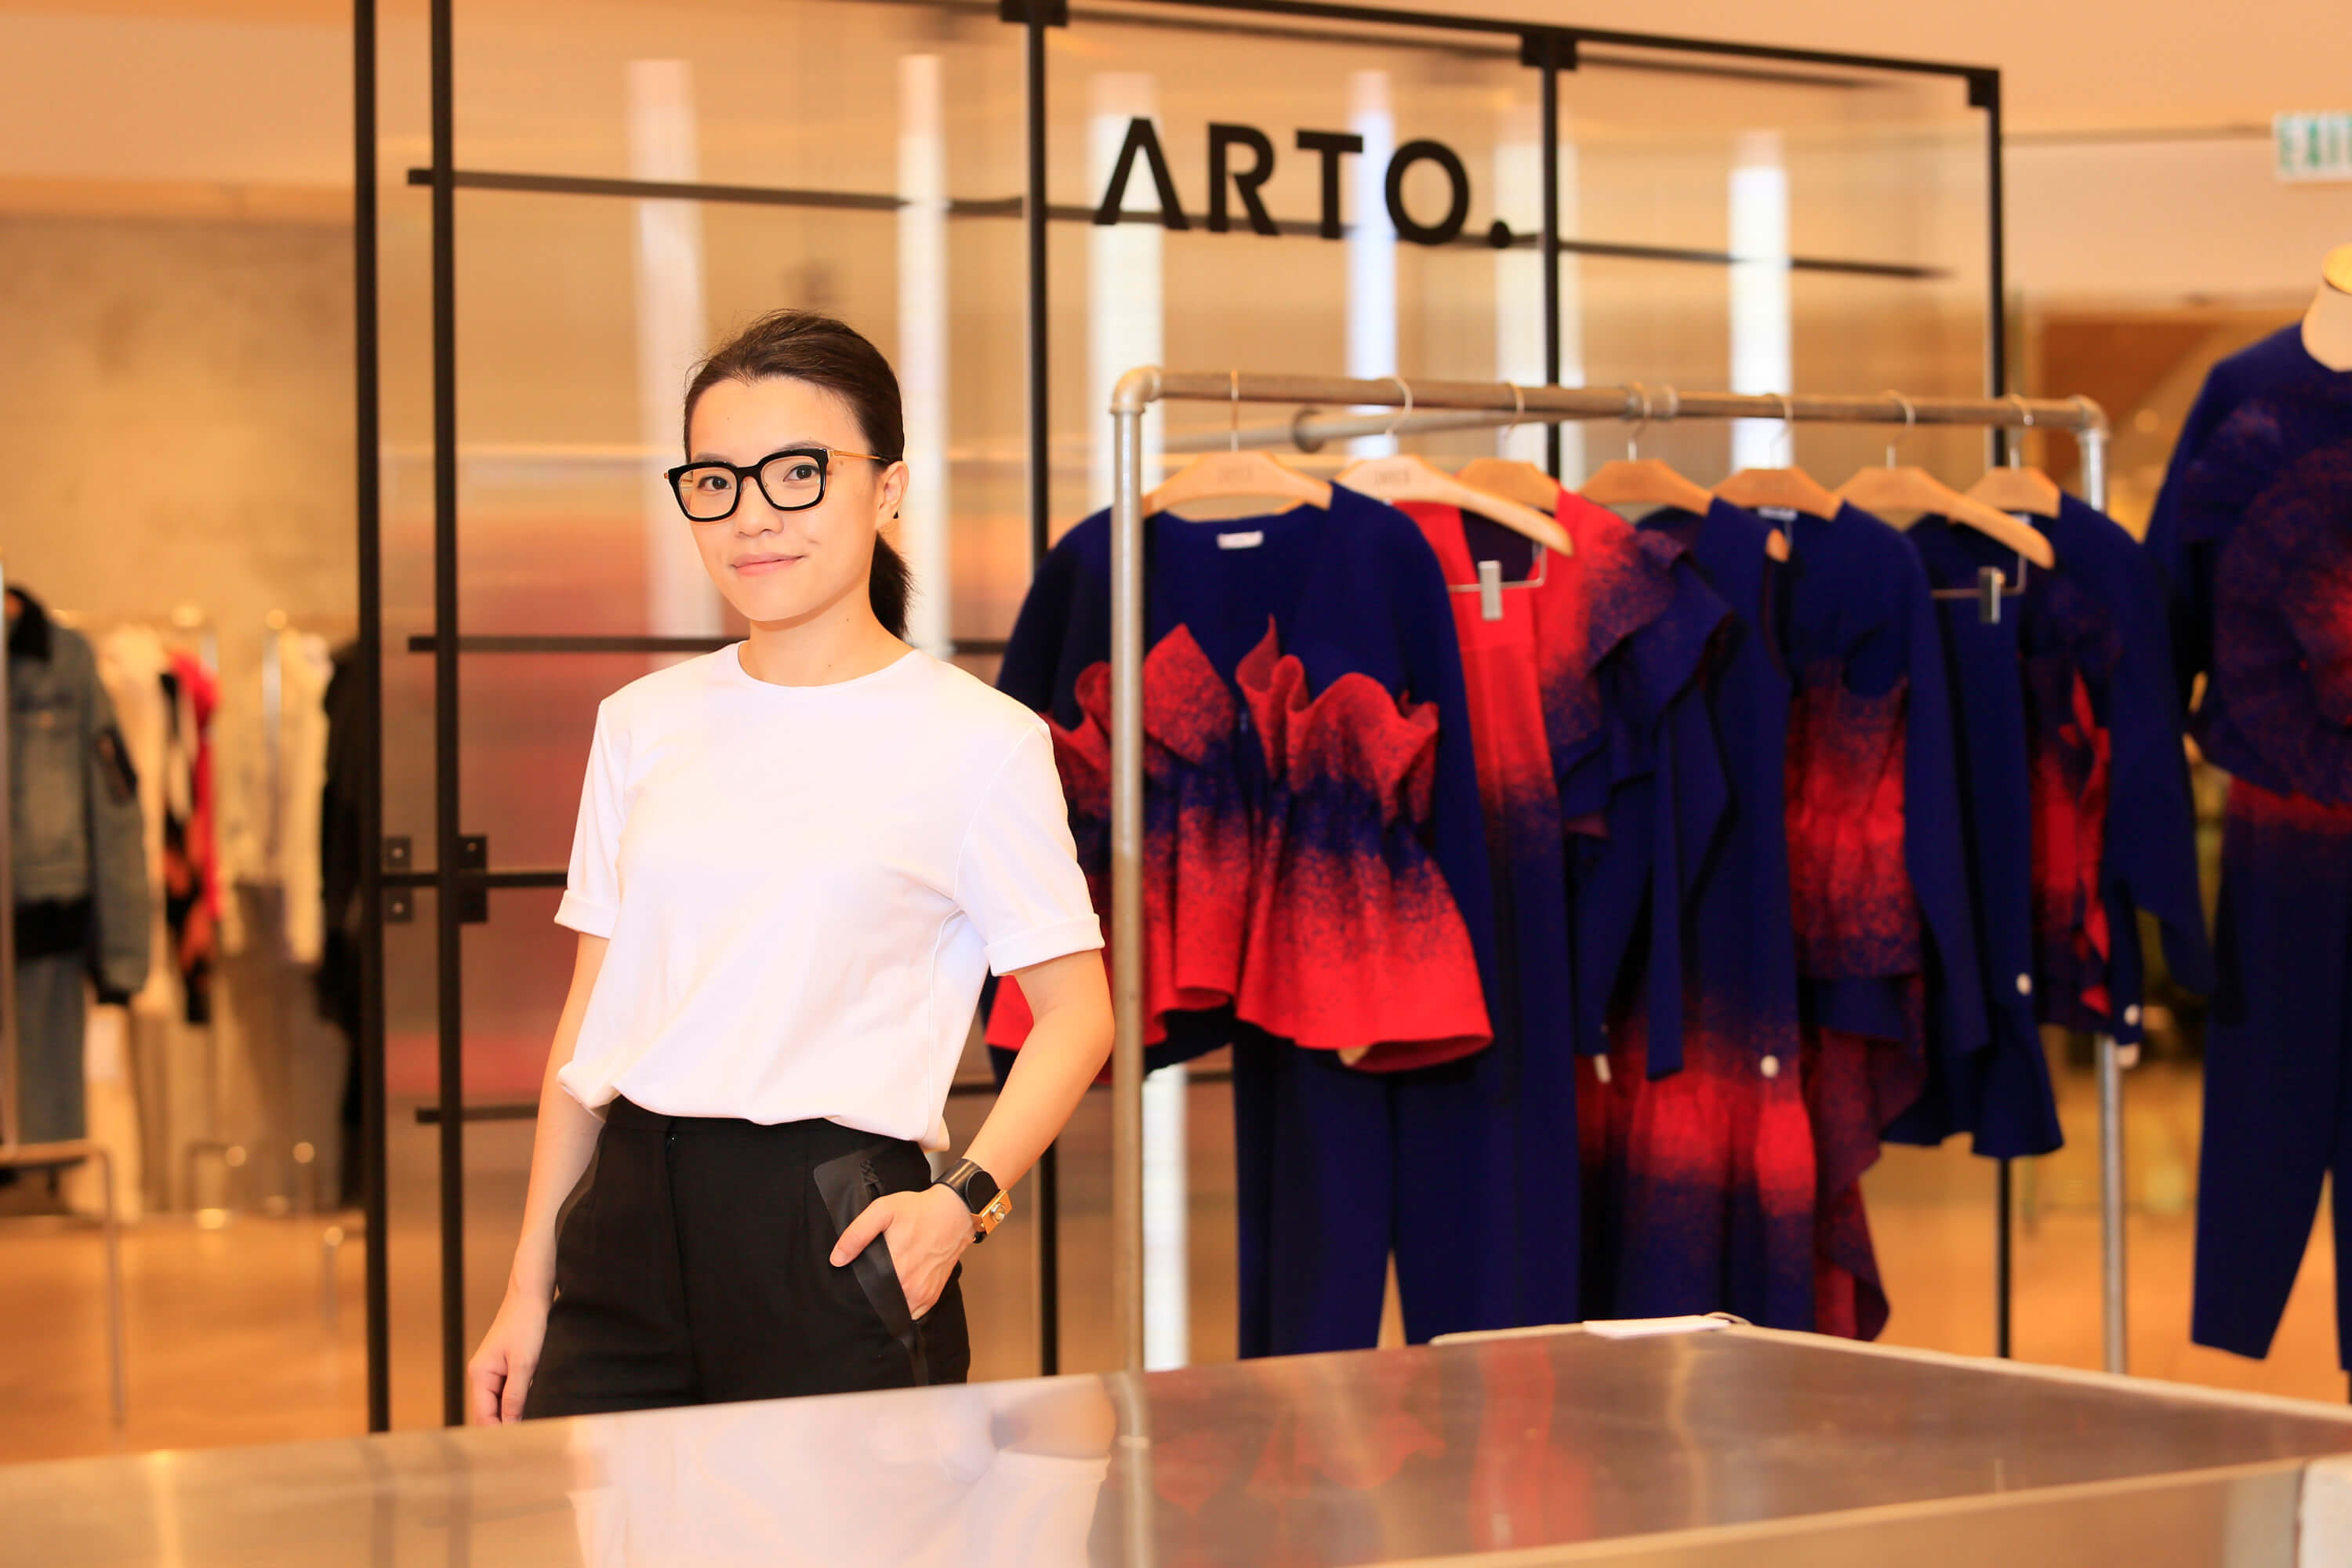 Young home-grown fashion designer Arto Wong and the “ARTO.” Capsule Collection, which is now available at JOYCE in Pacific Place, Hong Kong and at JOYCE in Shanghai.